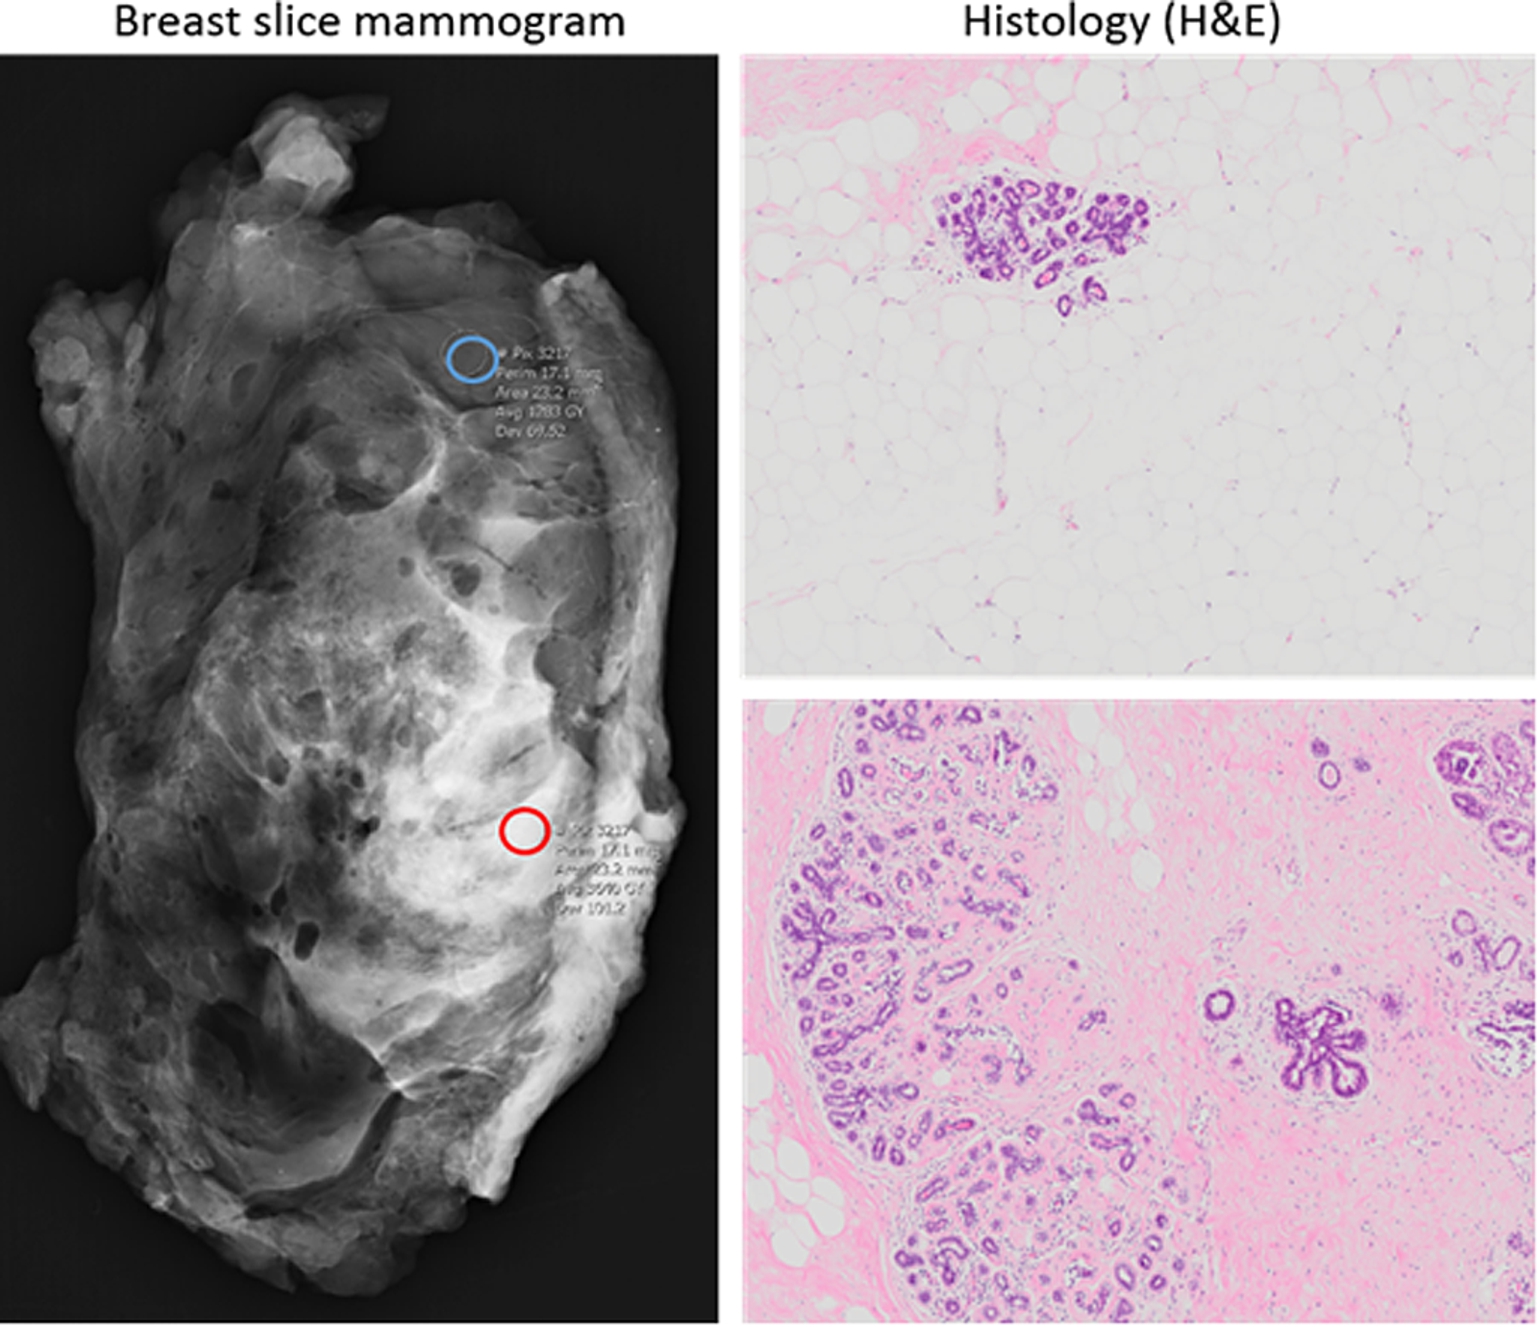 Left panel: Mammogram of breast slice indicating regions of high (red circle) and low (blue circle) mammographically dense tissue. Right panel: Haematoxylin and eosin (H&E) stain of representative low-MD (top) and high-MD (bottom) regions following histological processing (4X objective).